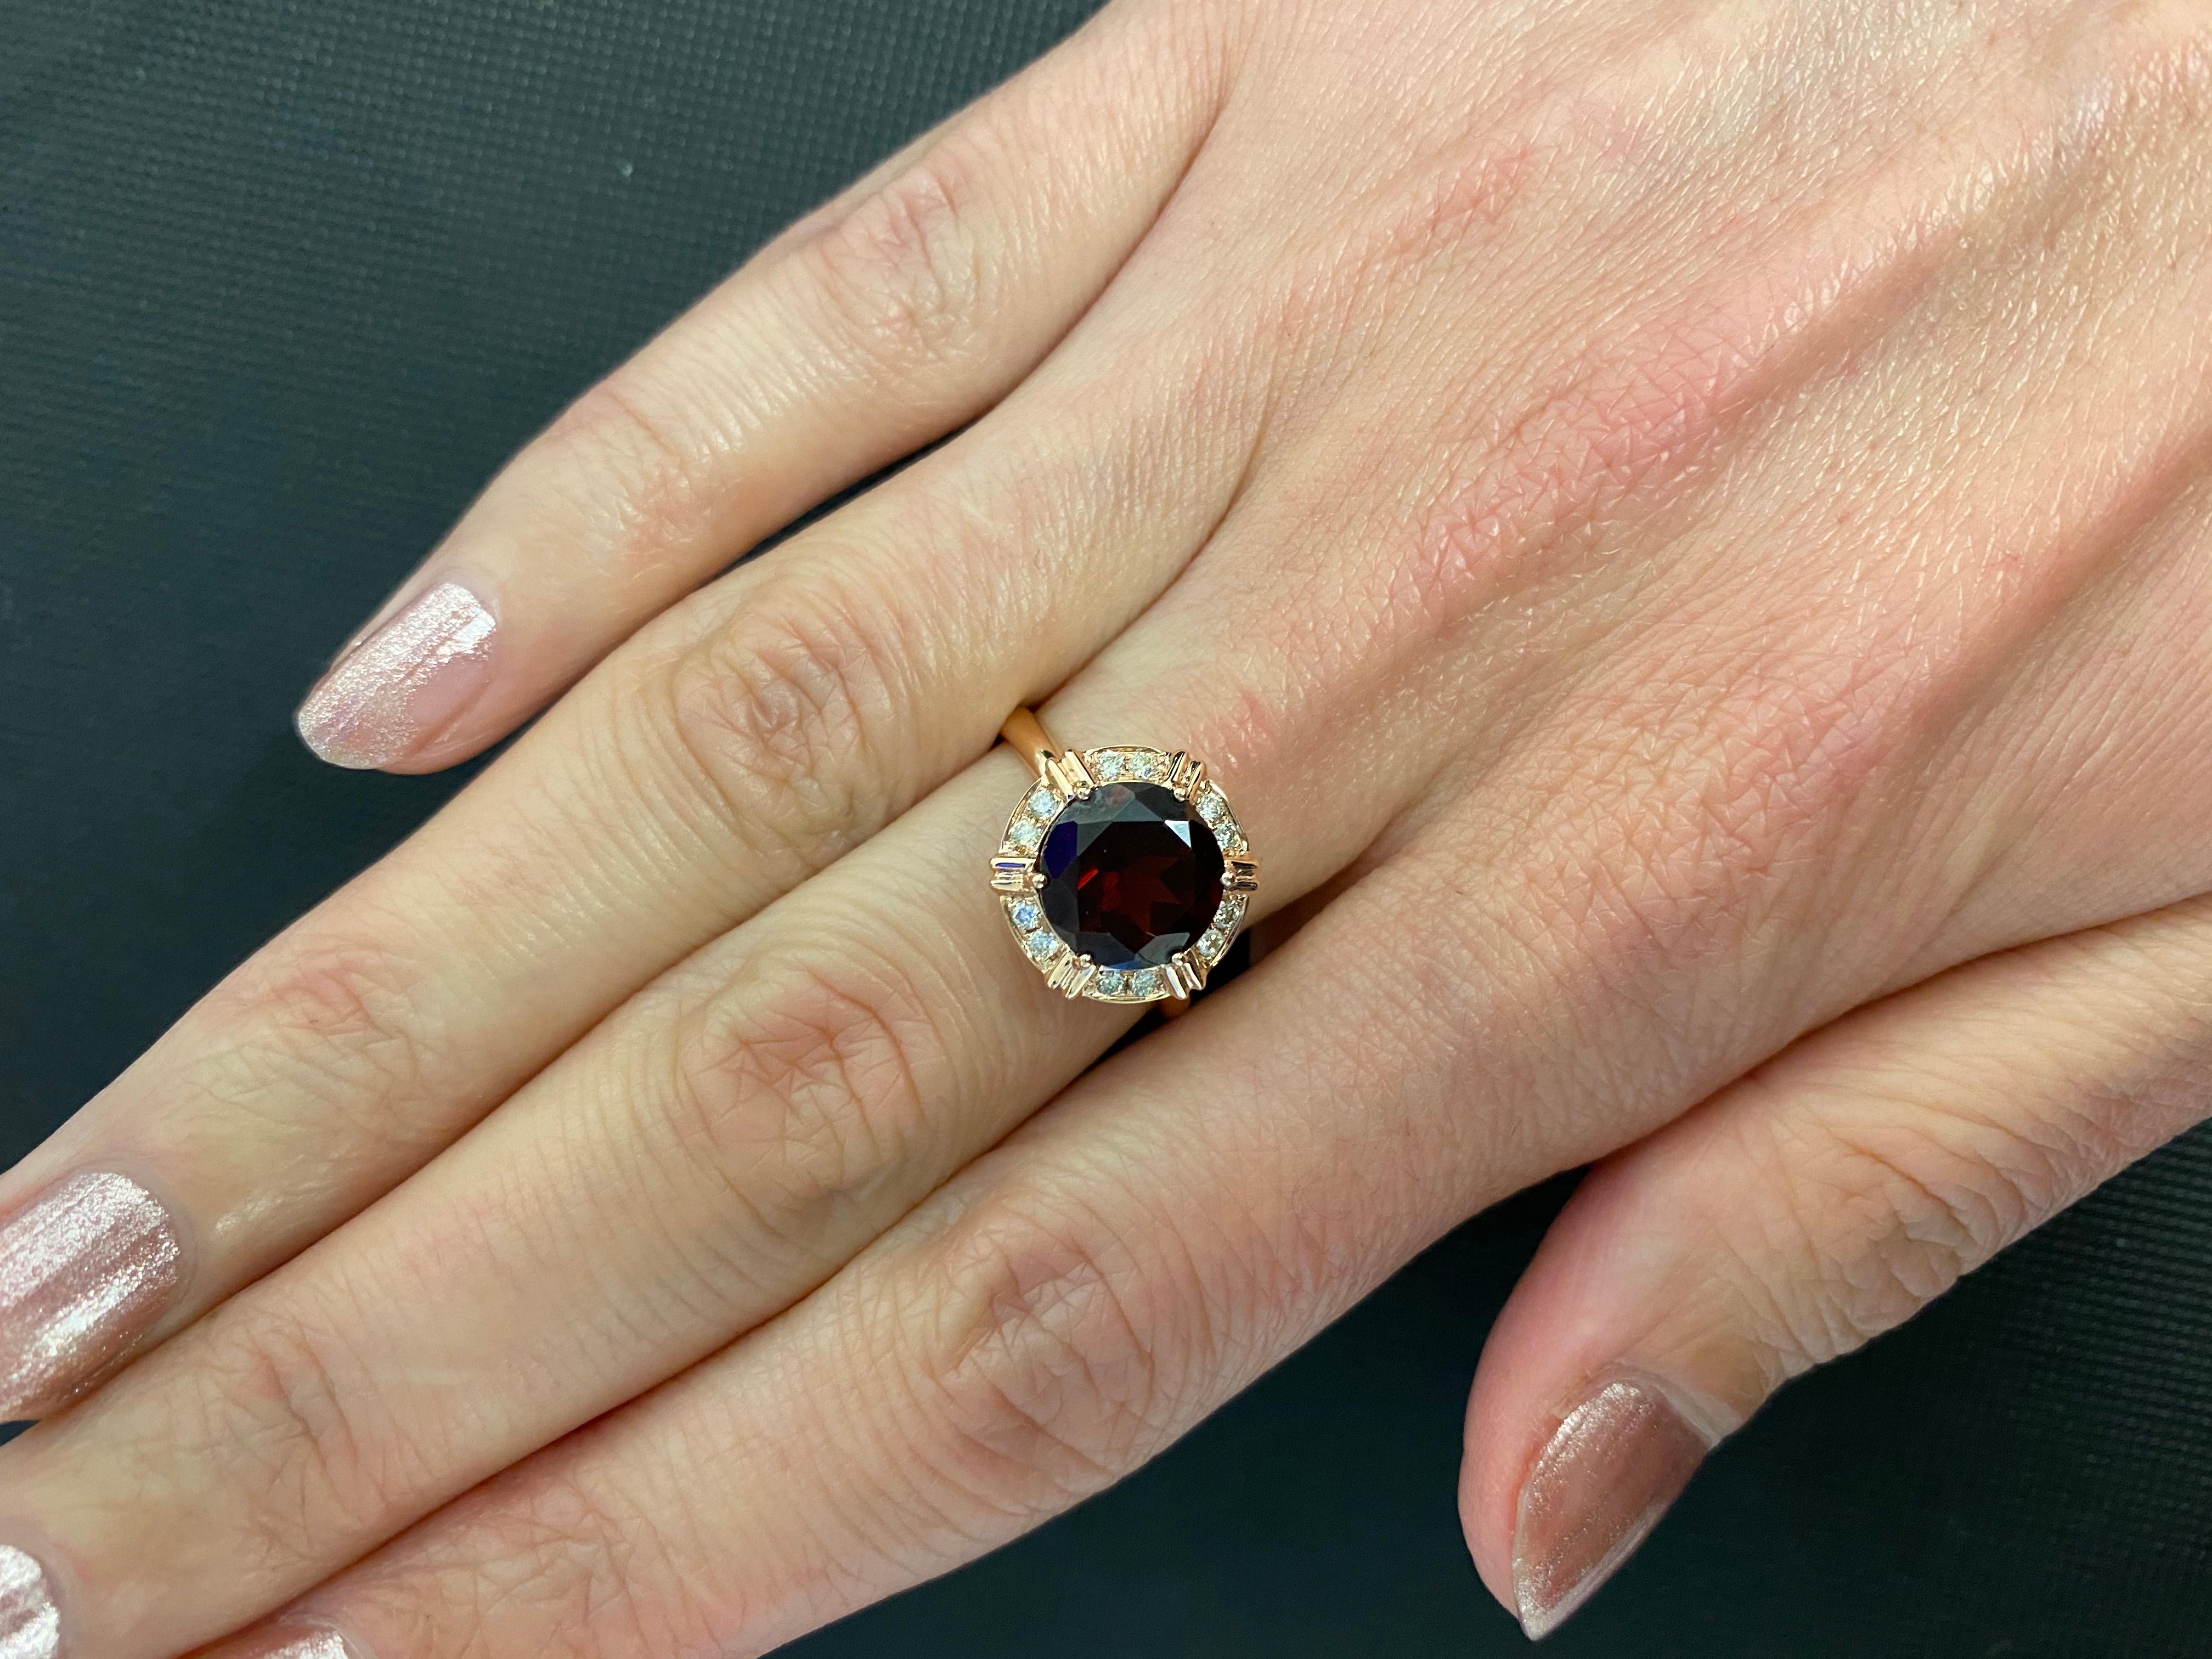 Fancy Round Red Garnet Diamond Halo 18 Karat Rose Gold Cocktail Statement Ring
18 Karat Rose Gold
3.15 CT Round Cut Garnet
0.14 CT Diamond of G Color, SI1 Clarity

Important Information:
Please note that this item will take 2-4 weeks to deliver - it